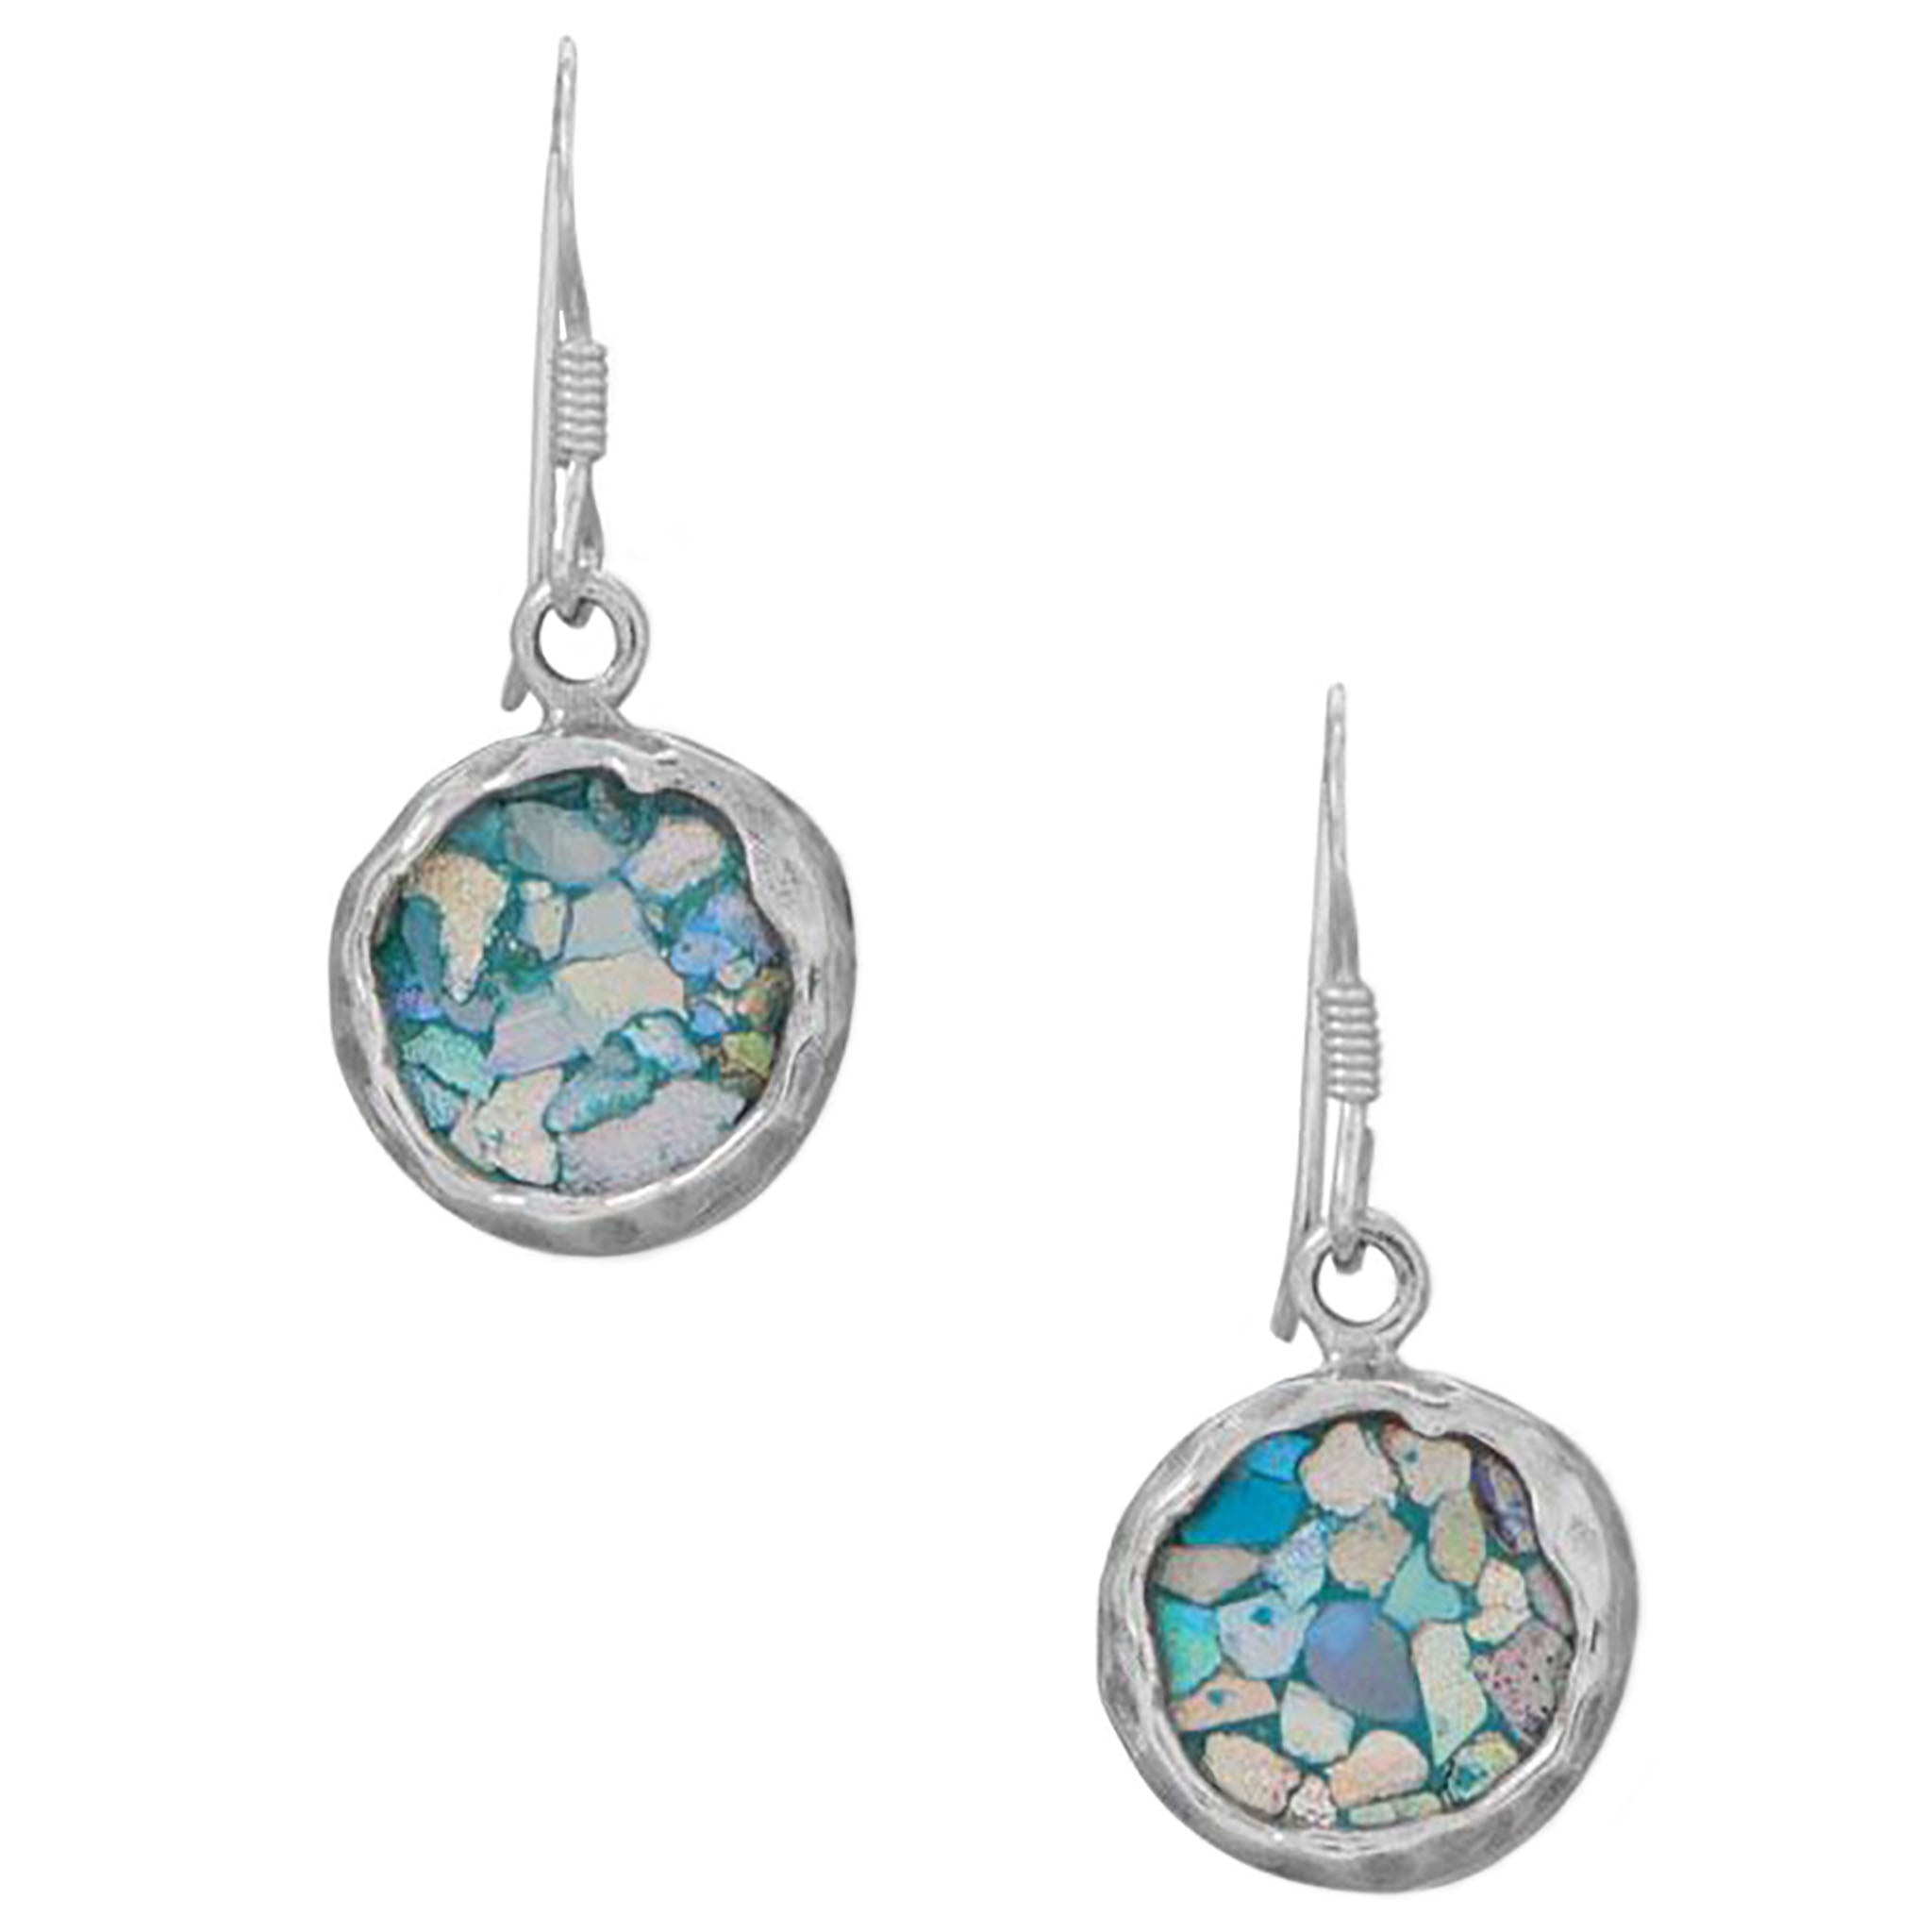 Hammered Silver Roman Glass Earrings